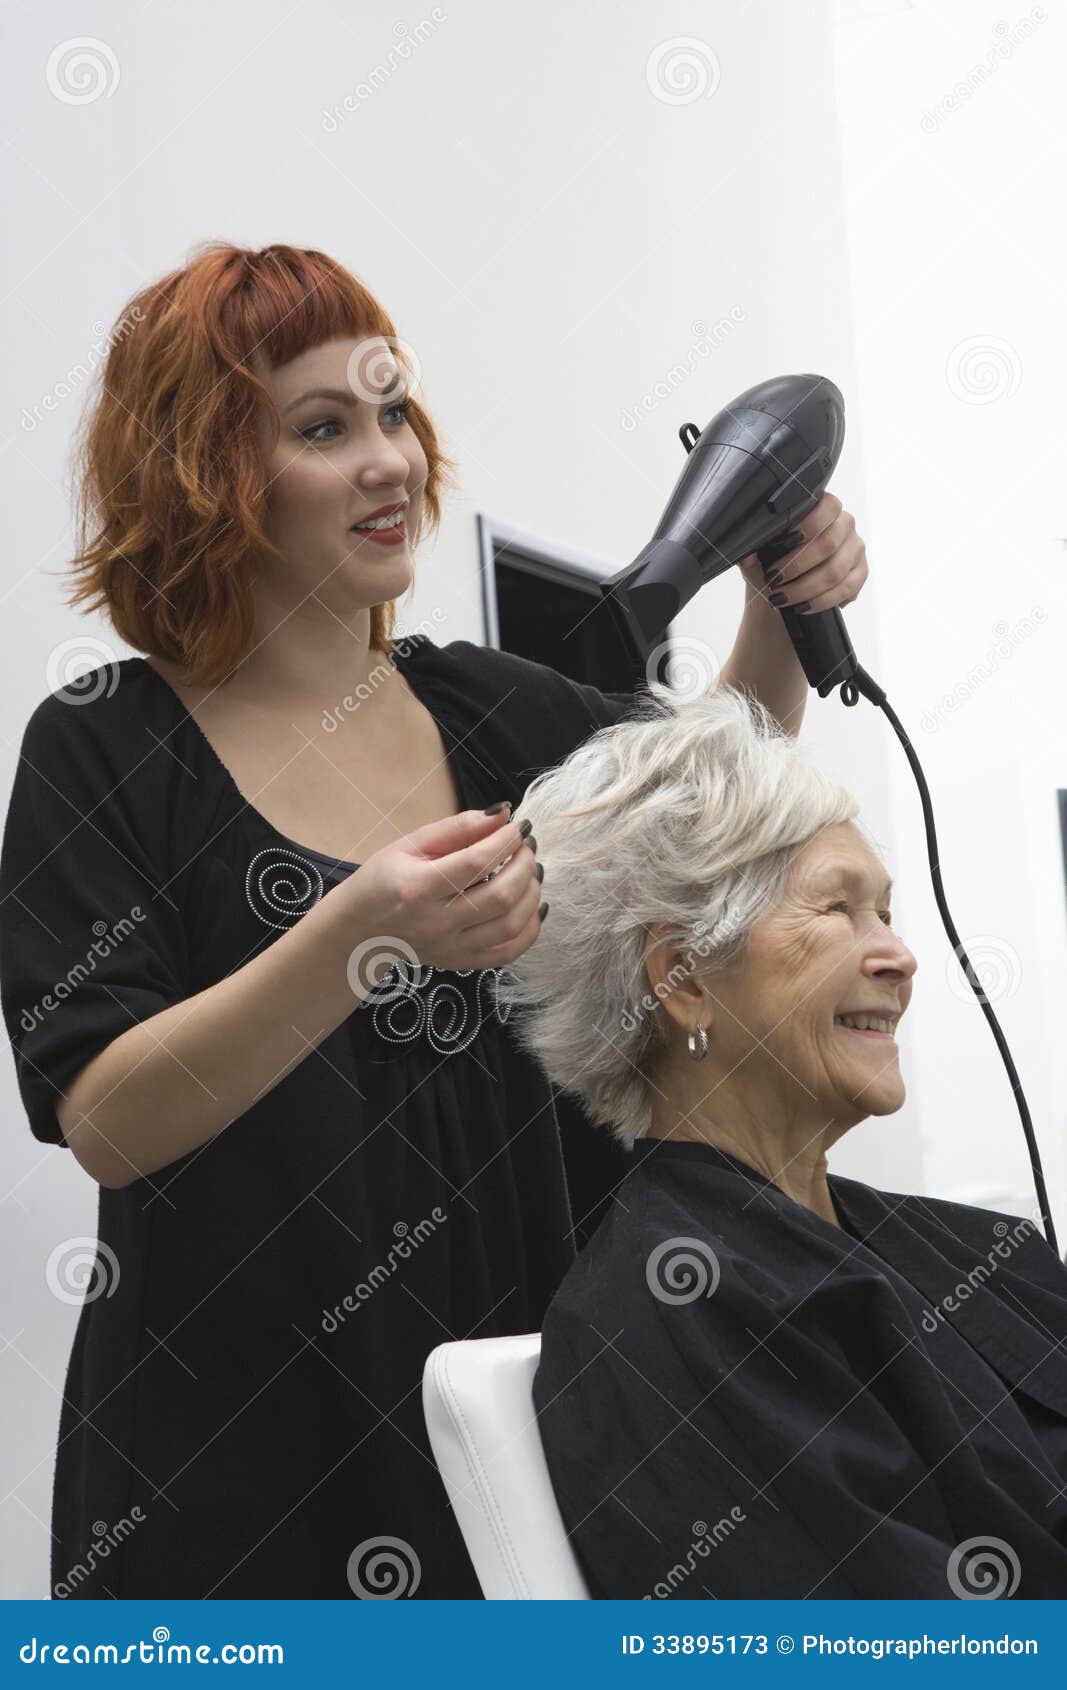 Stylist Blow Drying Senior Woman S Hair Stock Image - Image of drying,  female: 33895173